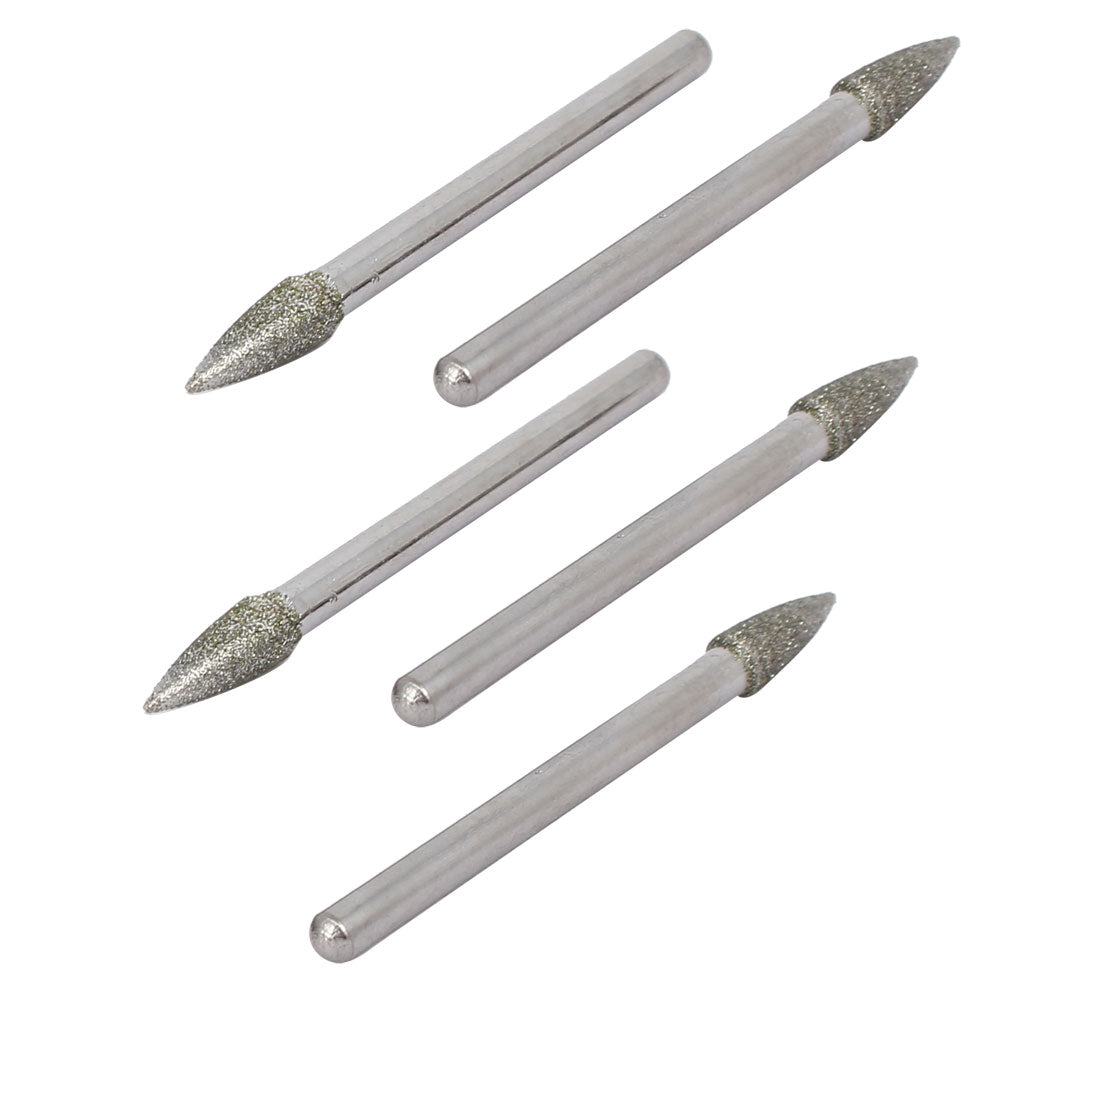 uxcell Uxcell 3mm 1/8" Shank 4mm Dia Cone Head Diamond Grinding Mounted Point Bit 5pcs